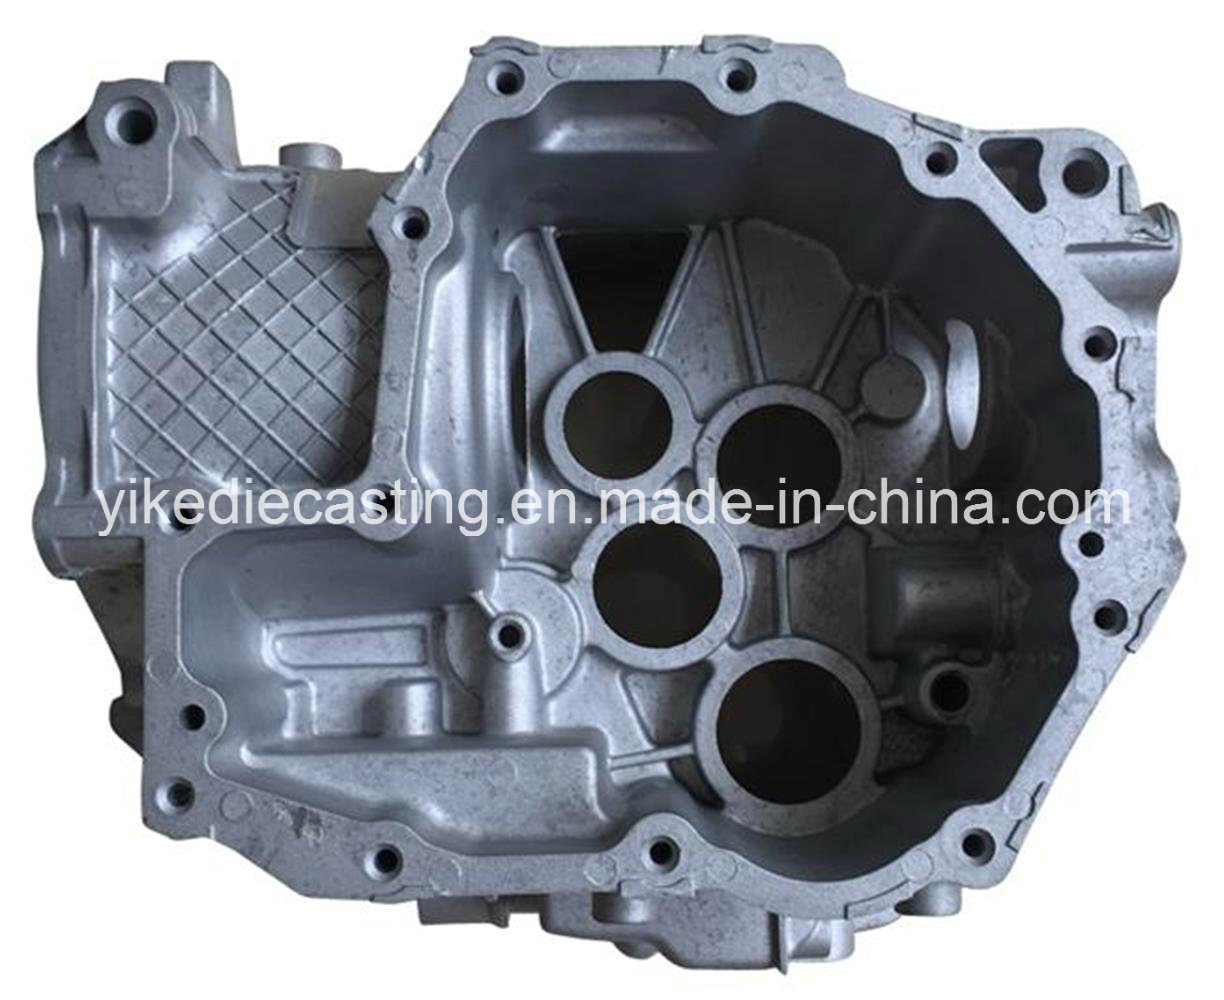 OEM Motor Parts Aluminum Die Casting with Competive Prices